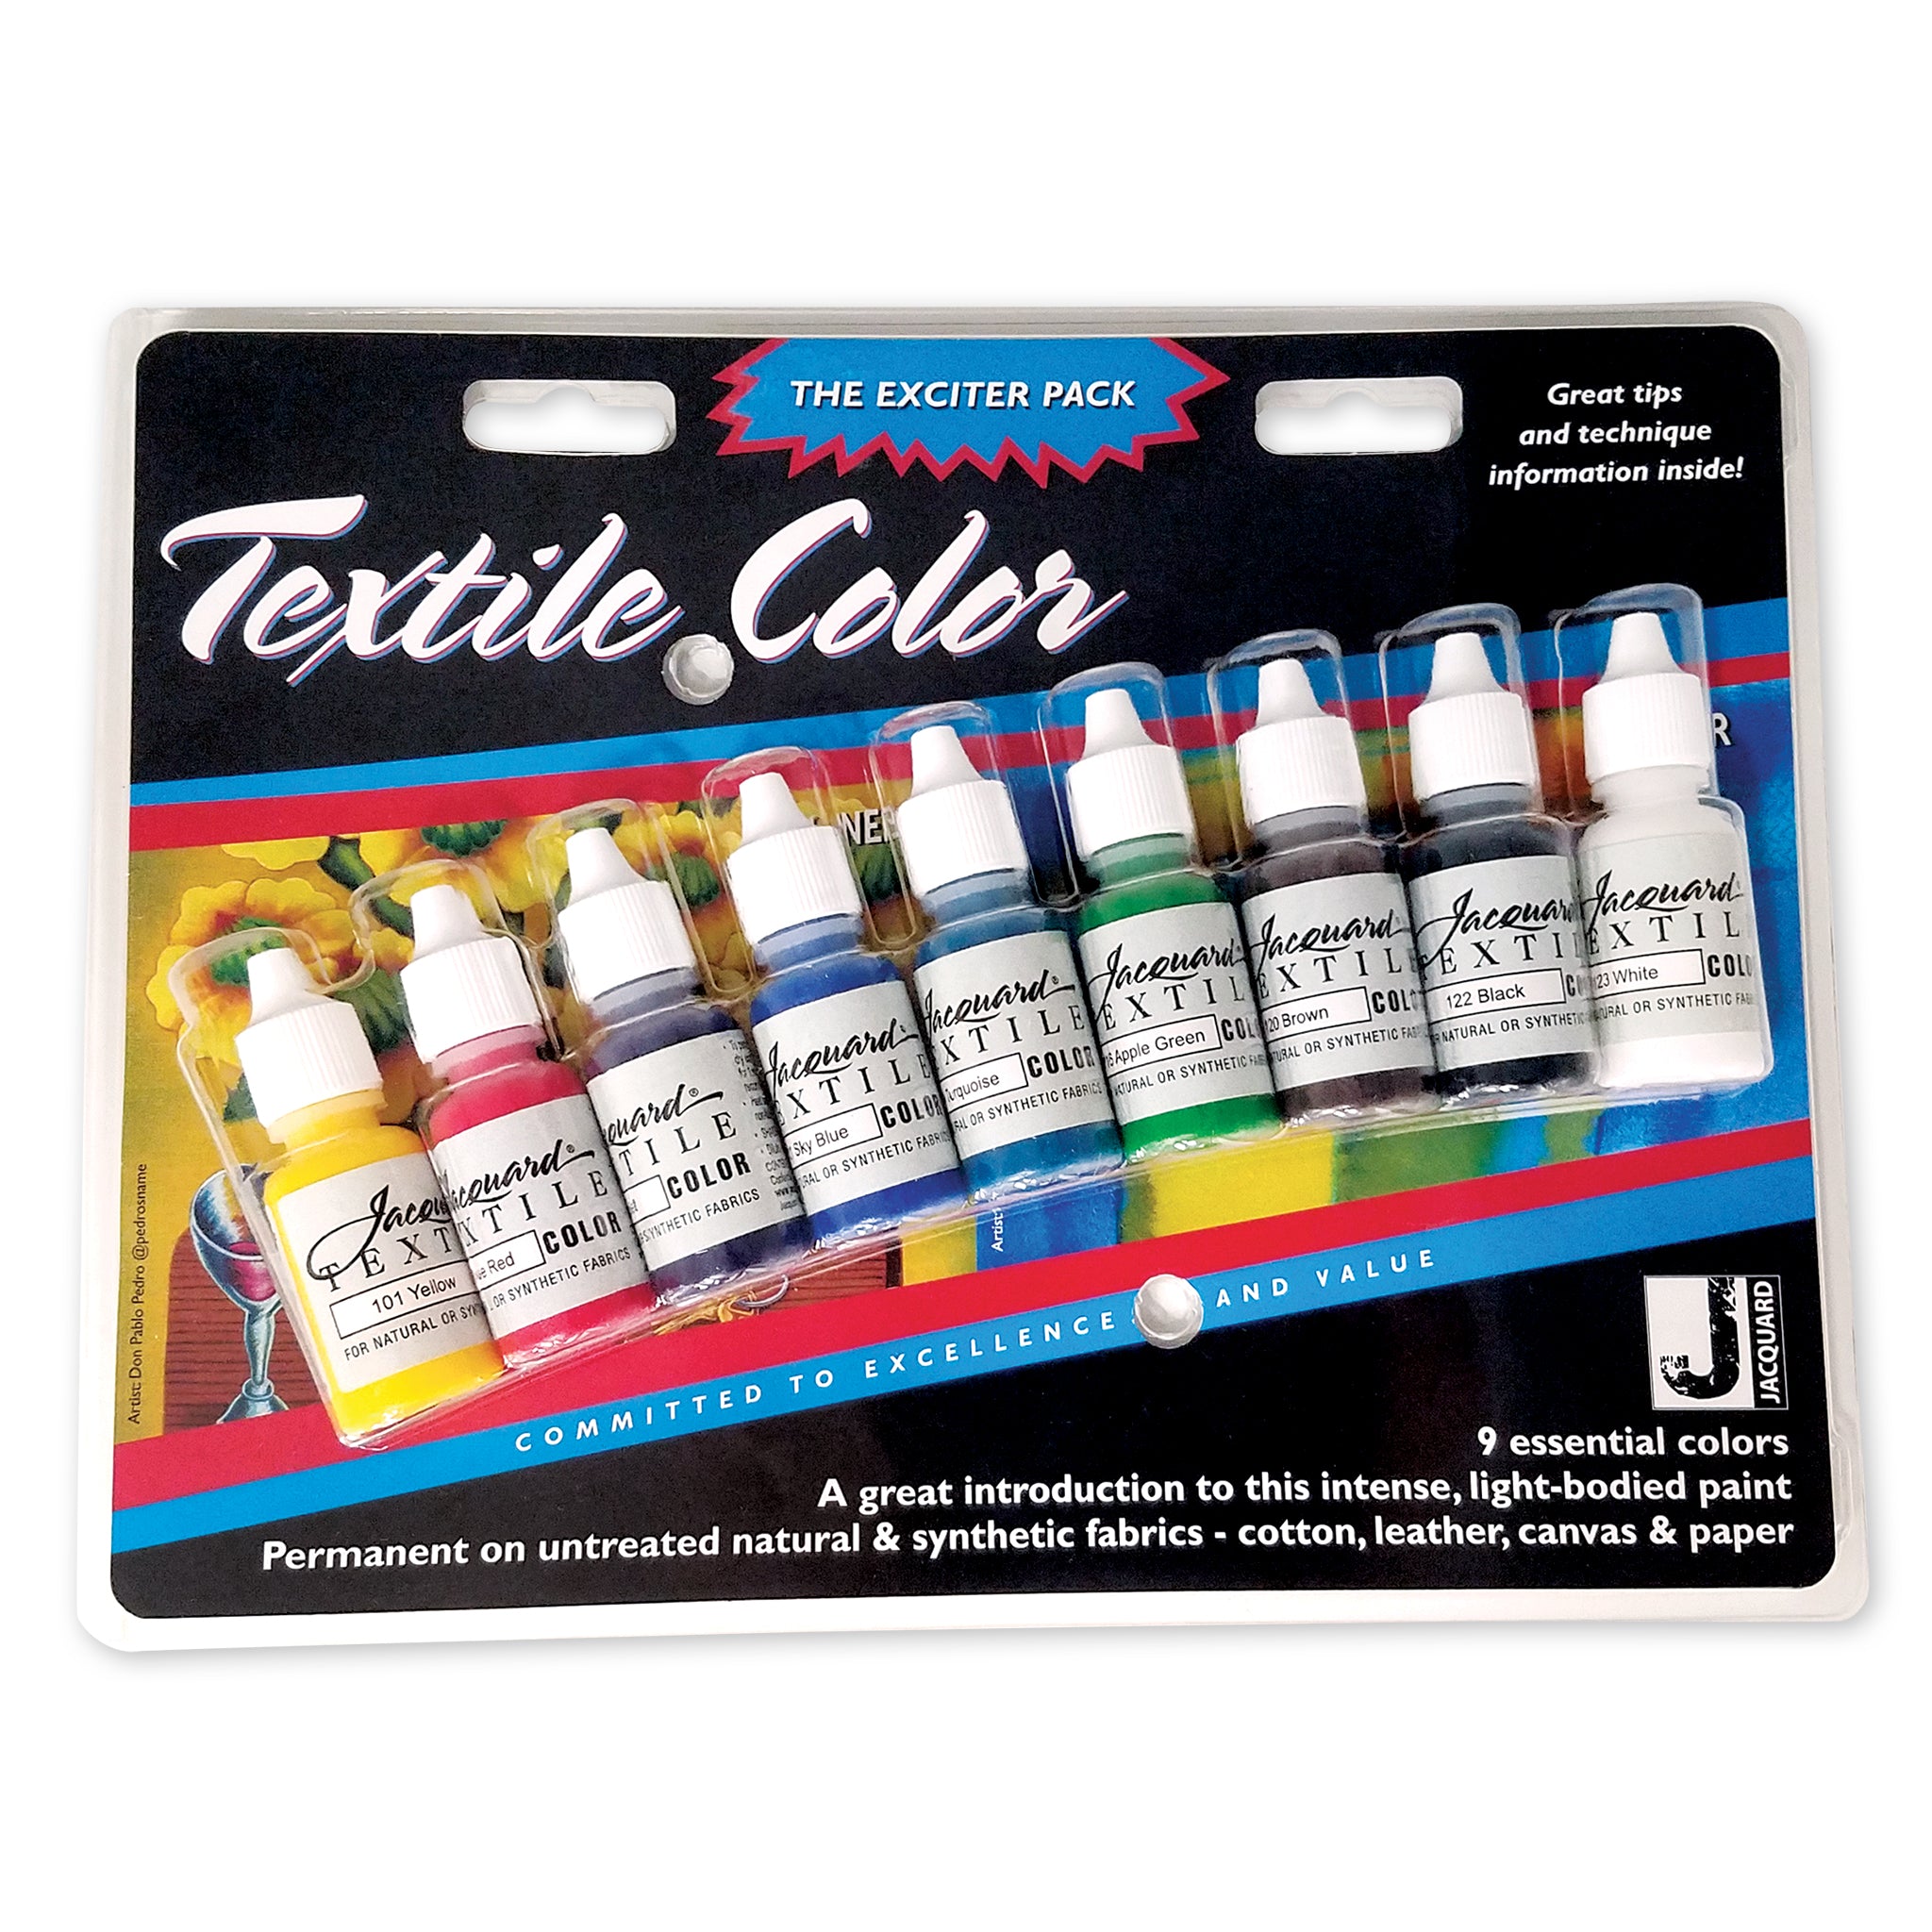 Fabric Marker | Permanent | Multiple Colors| Fade Resistant | Pack of 20 